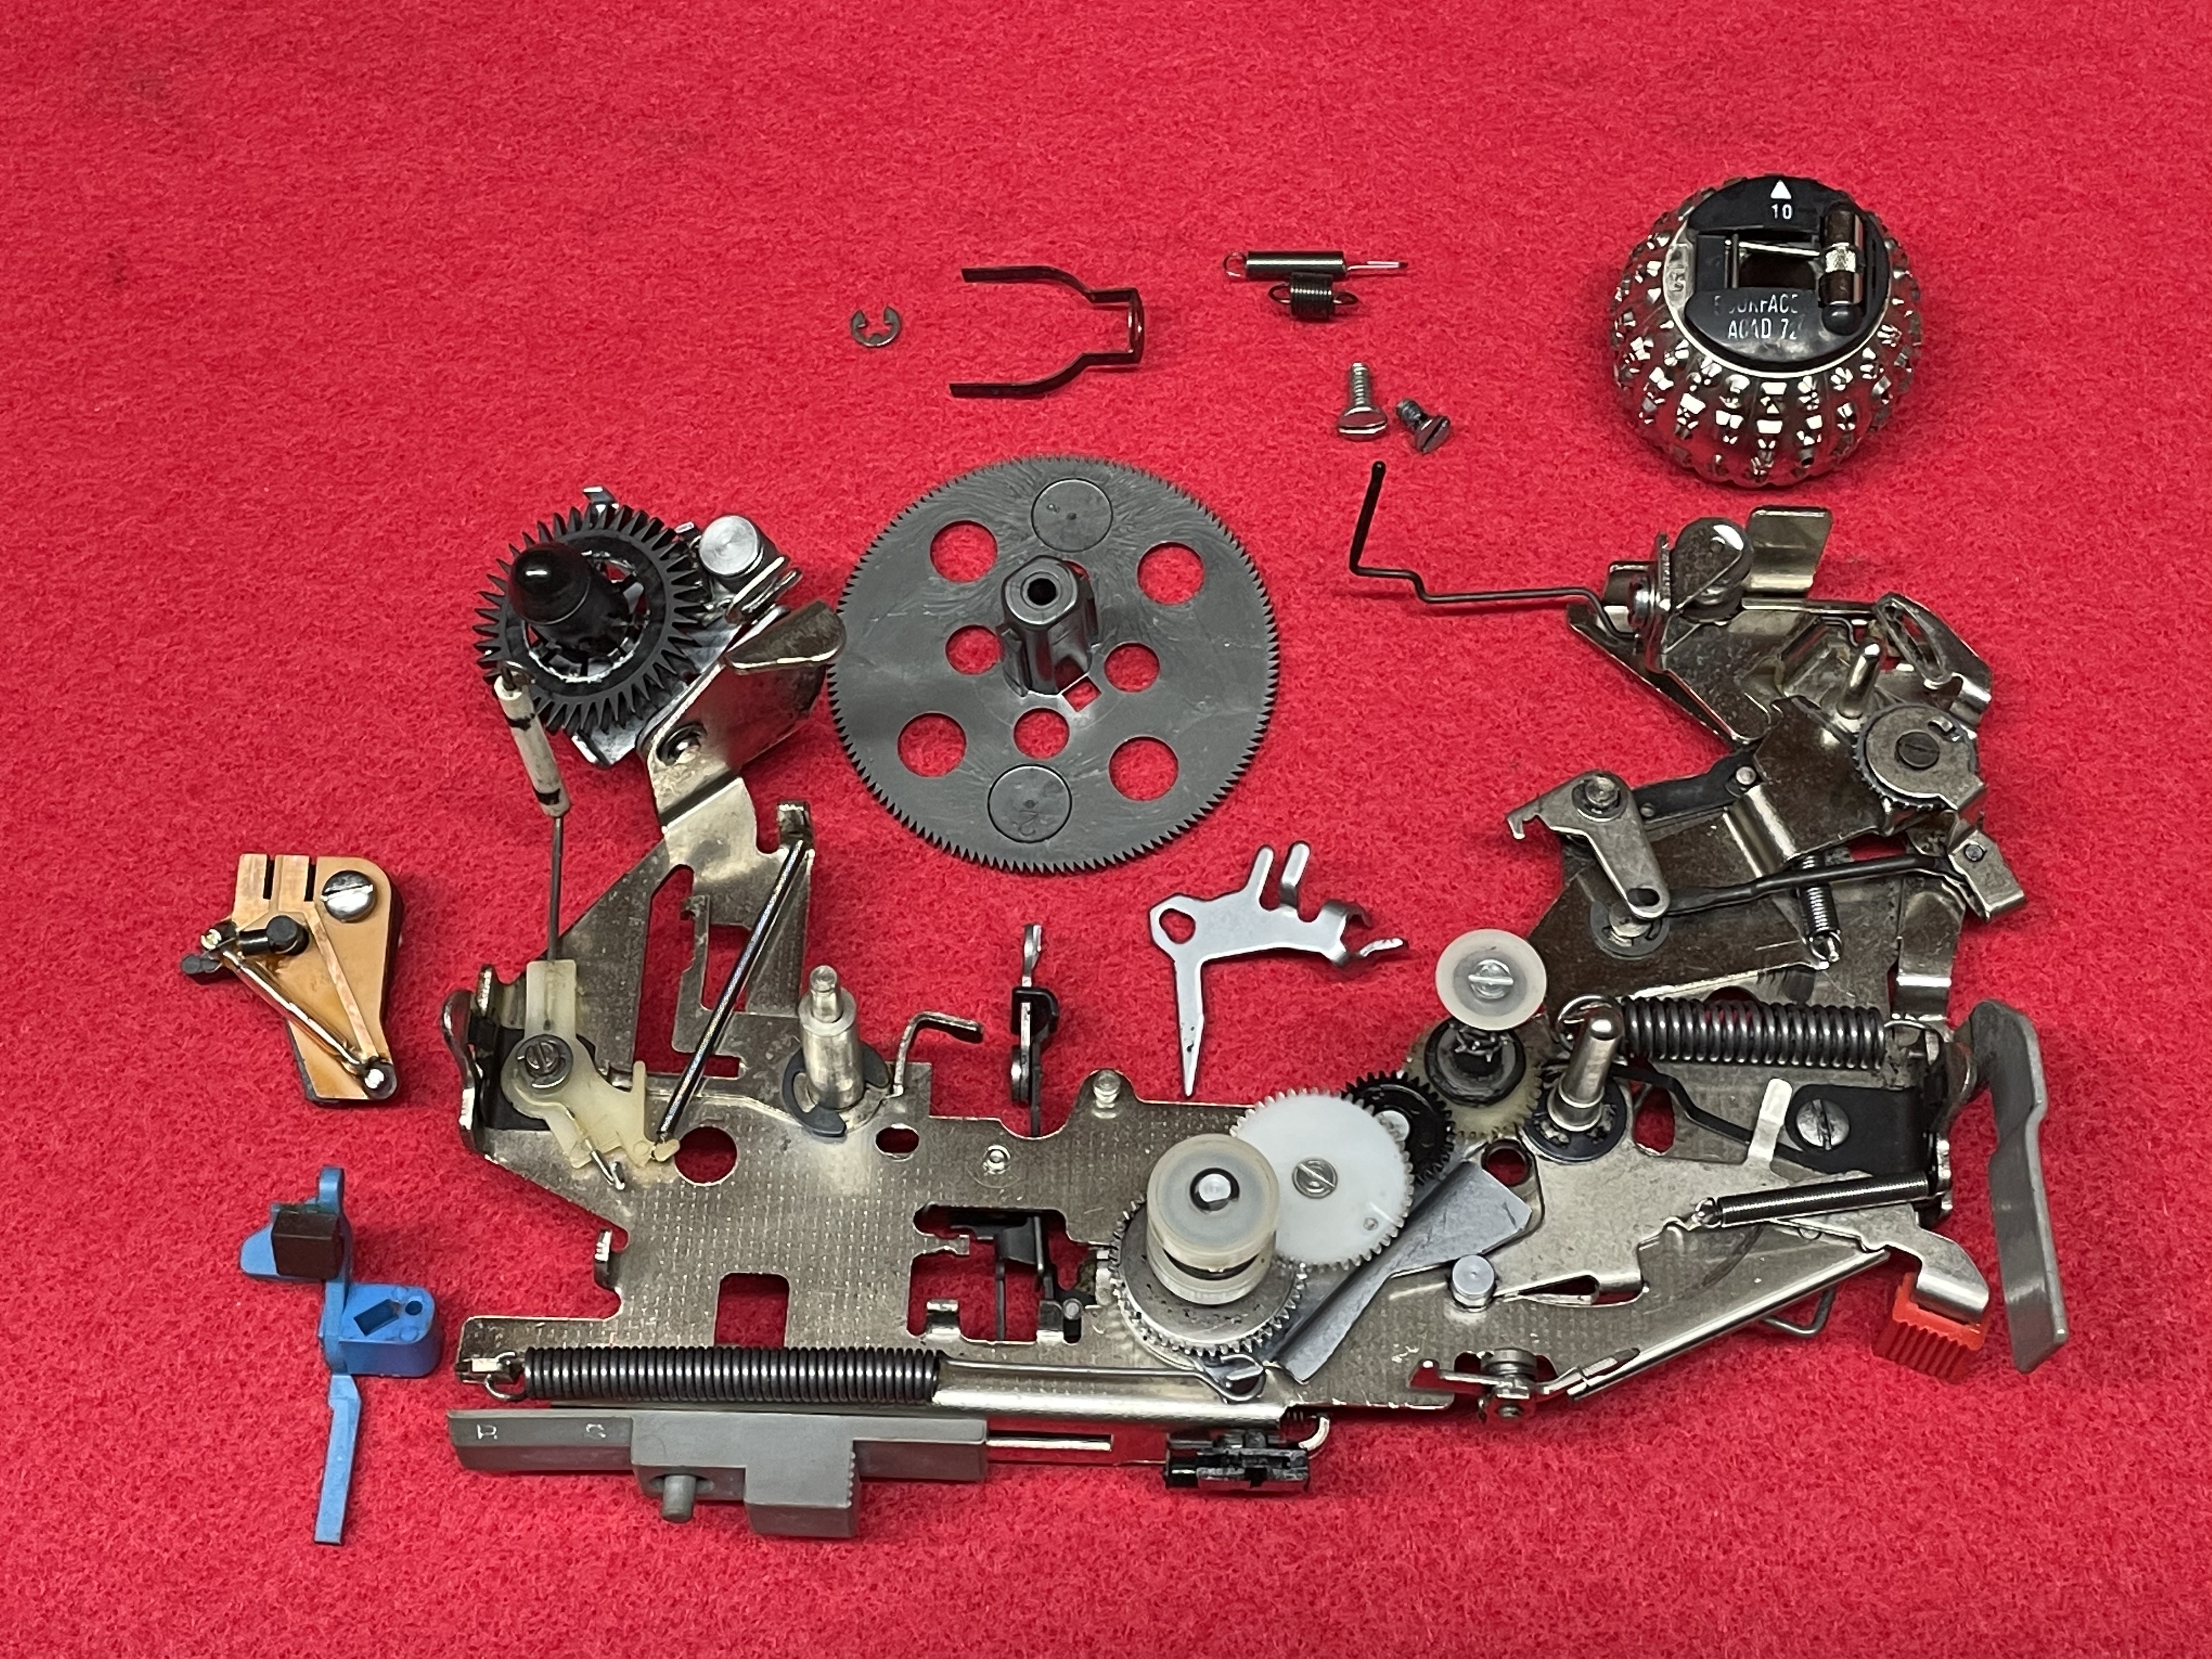 The ribbon mechanism after cleaning